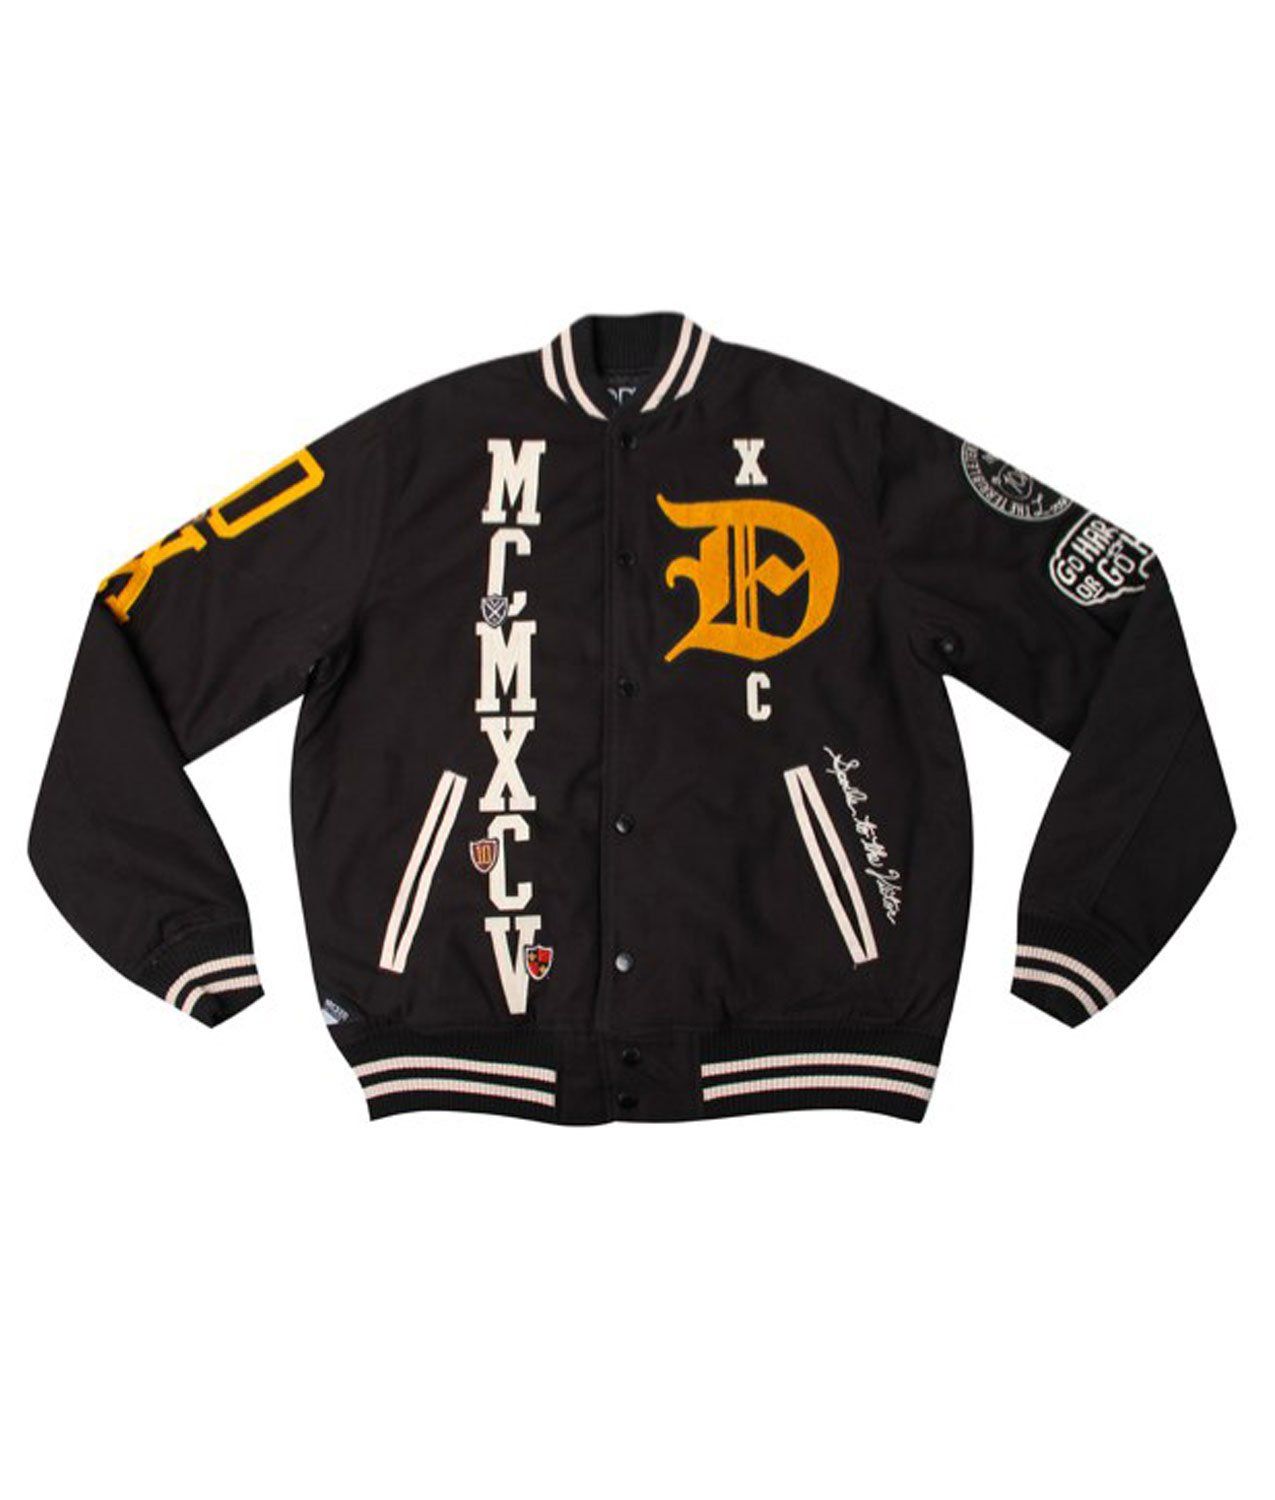 Rate this letterman jacket out of 10? Day 41 of What I Wore